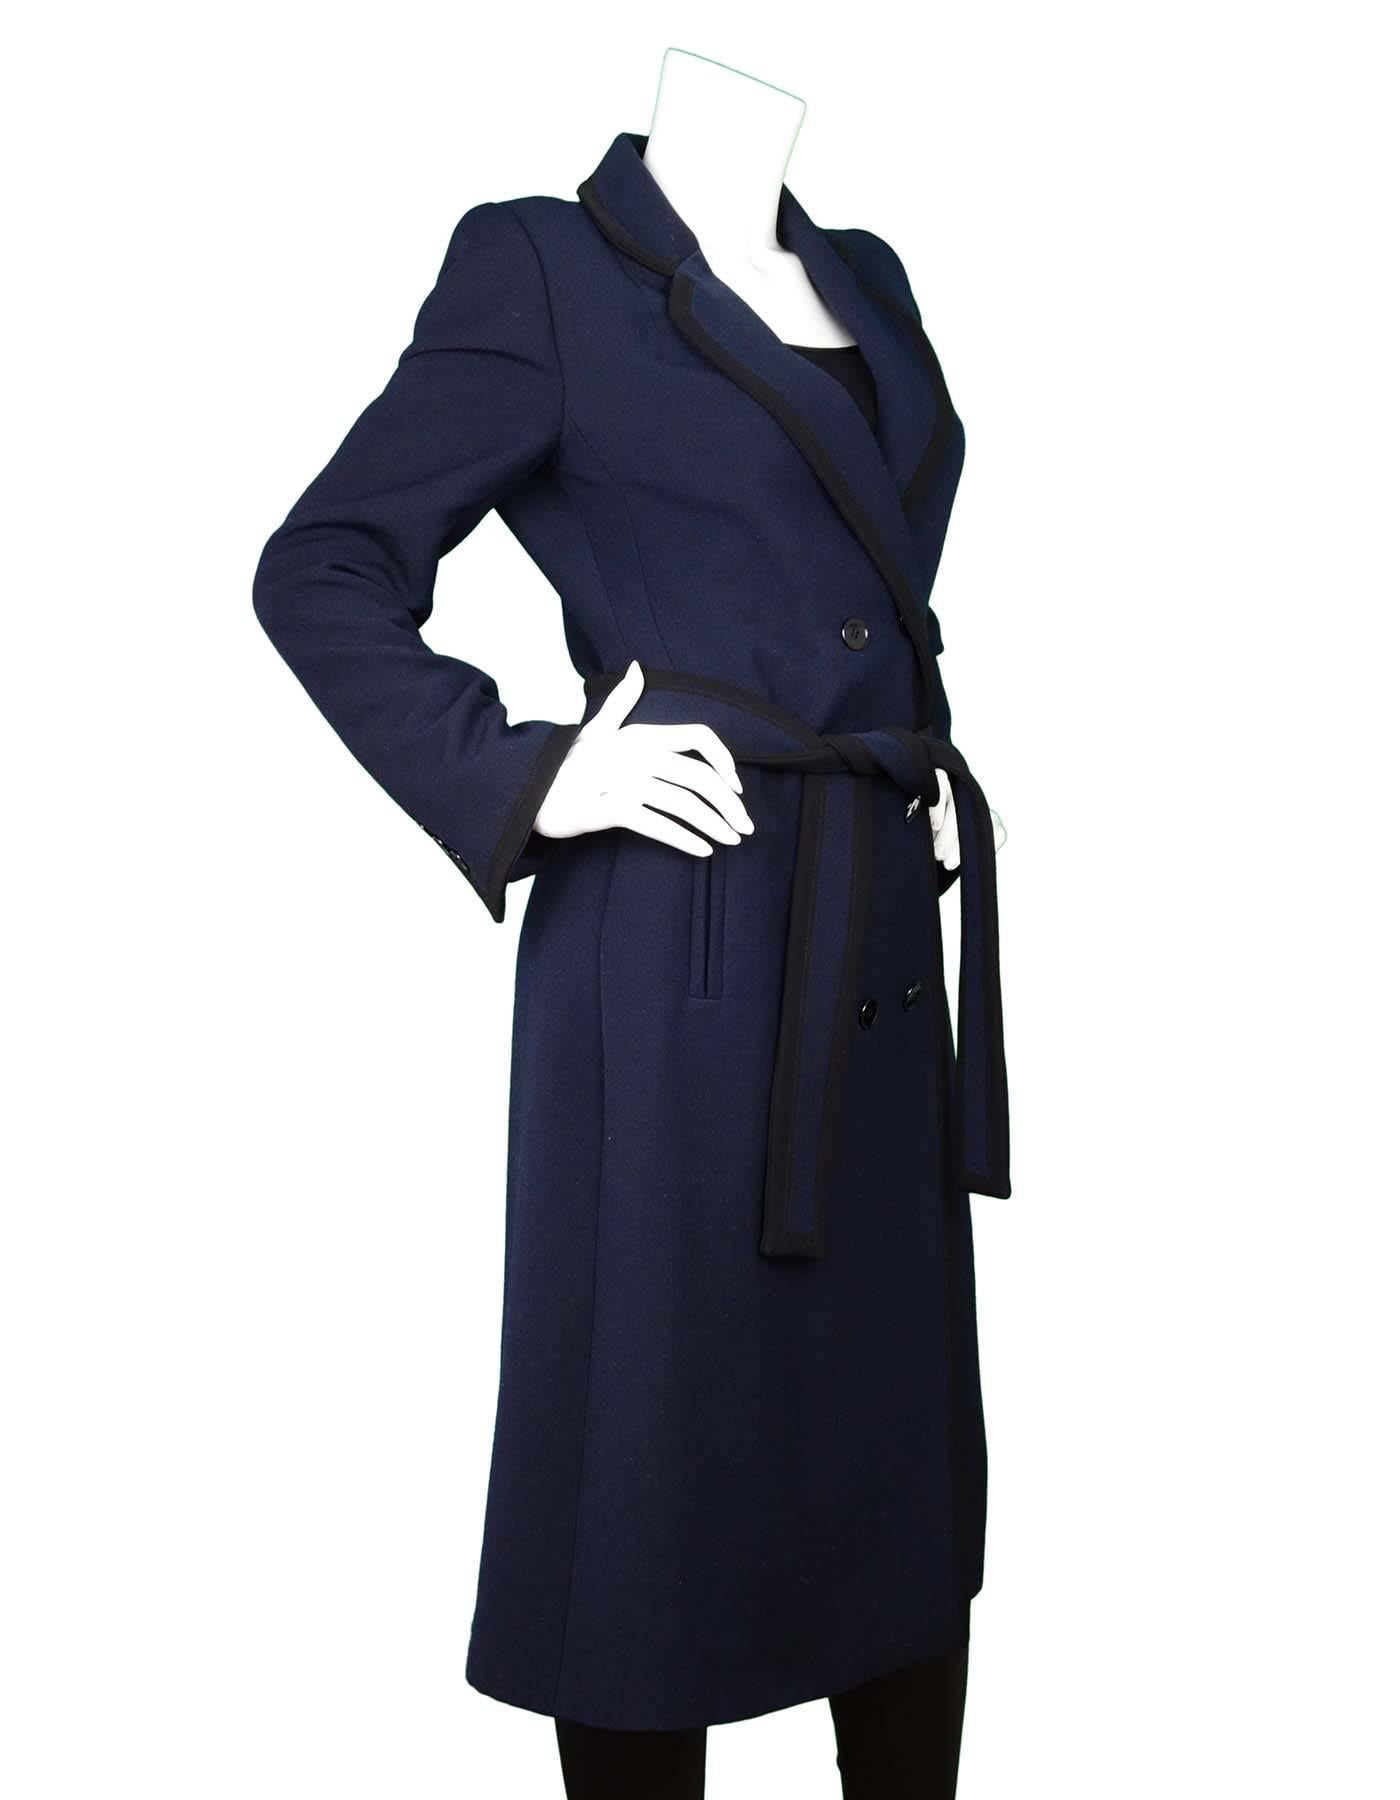 Dolce & Gabbana Navy and Black Wool Coat Sz 40
Features double breast closure

Made In: Italy
Color: Black and navy
Composition: 98% Wool, 2% Nylon
Lining: Black silk
Closure/Opening: Front button closure
Exterior Pockets: Two faux hip